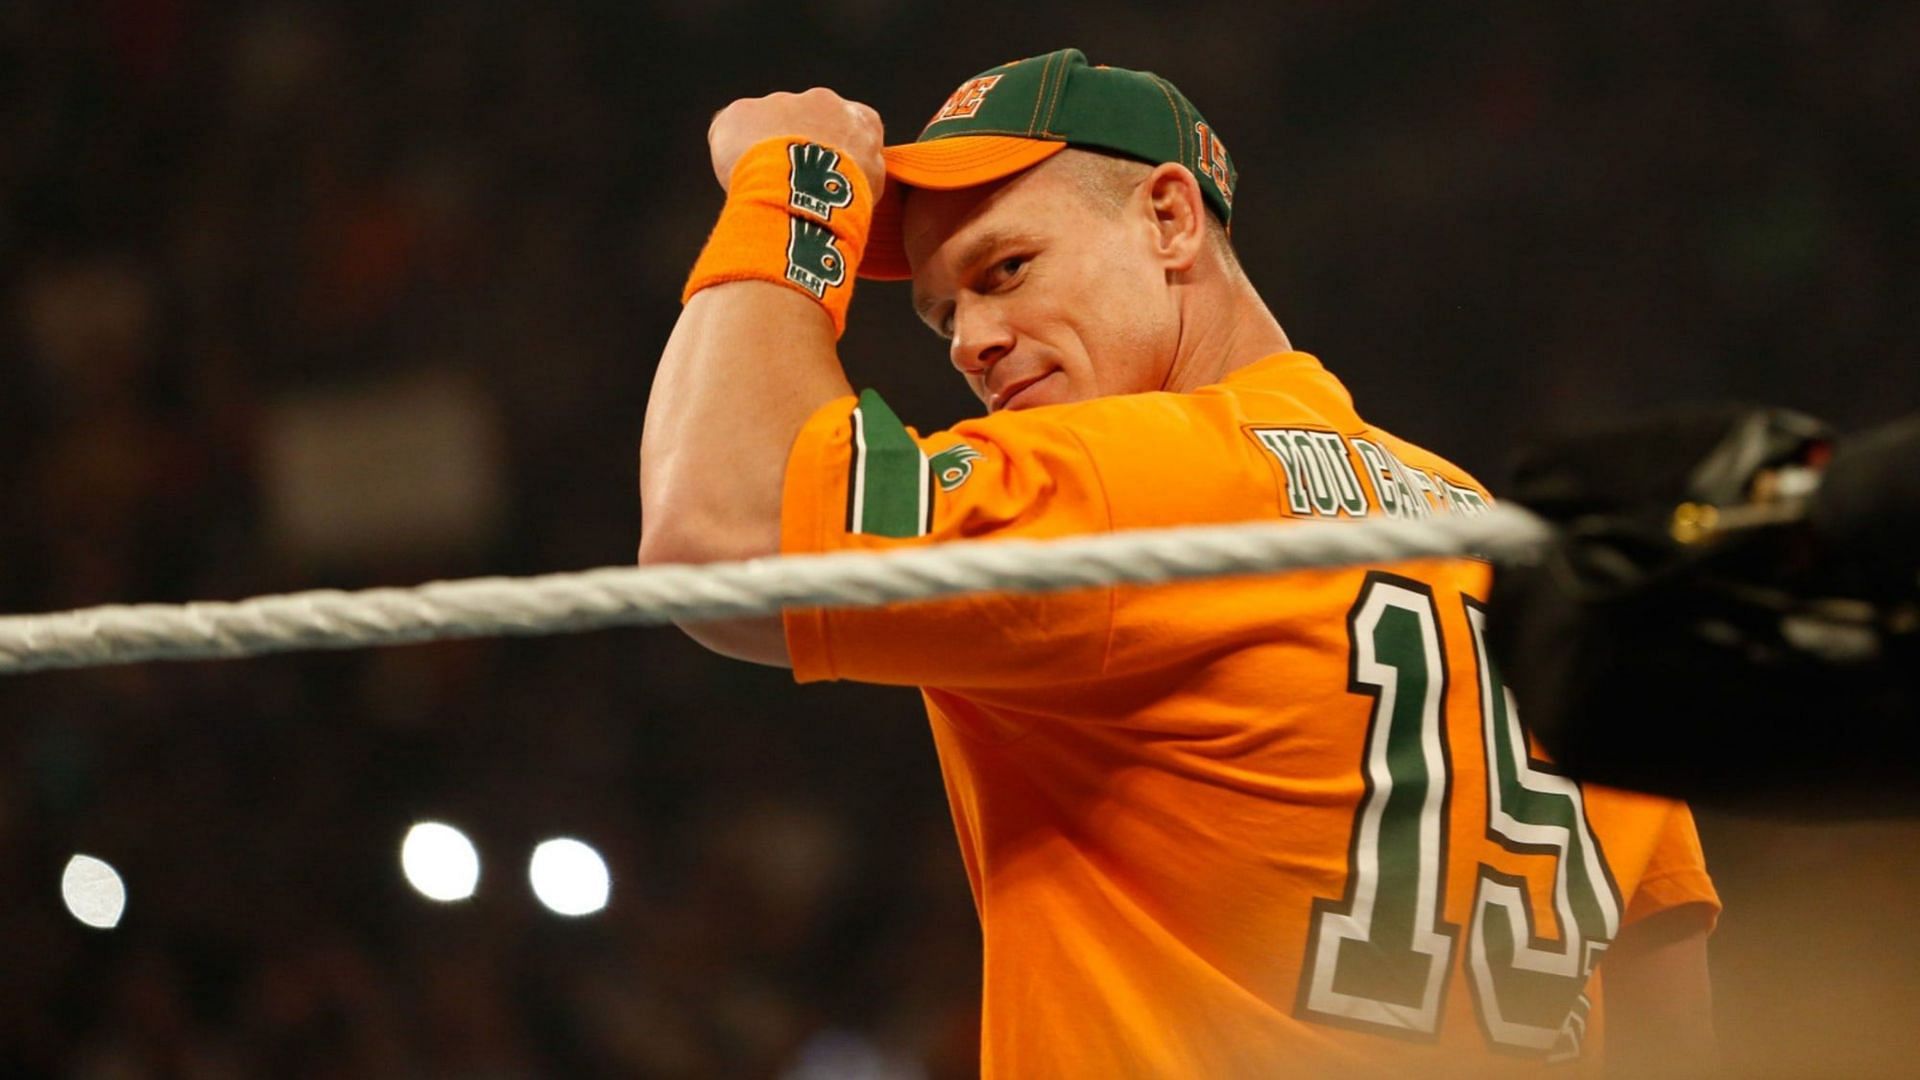 John Cena is now a part-time WWE star